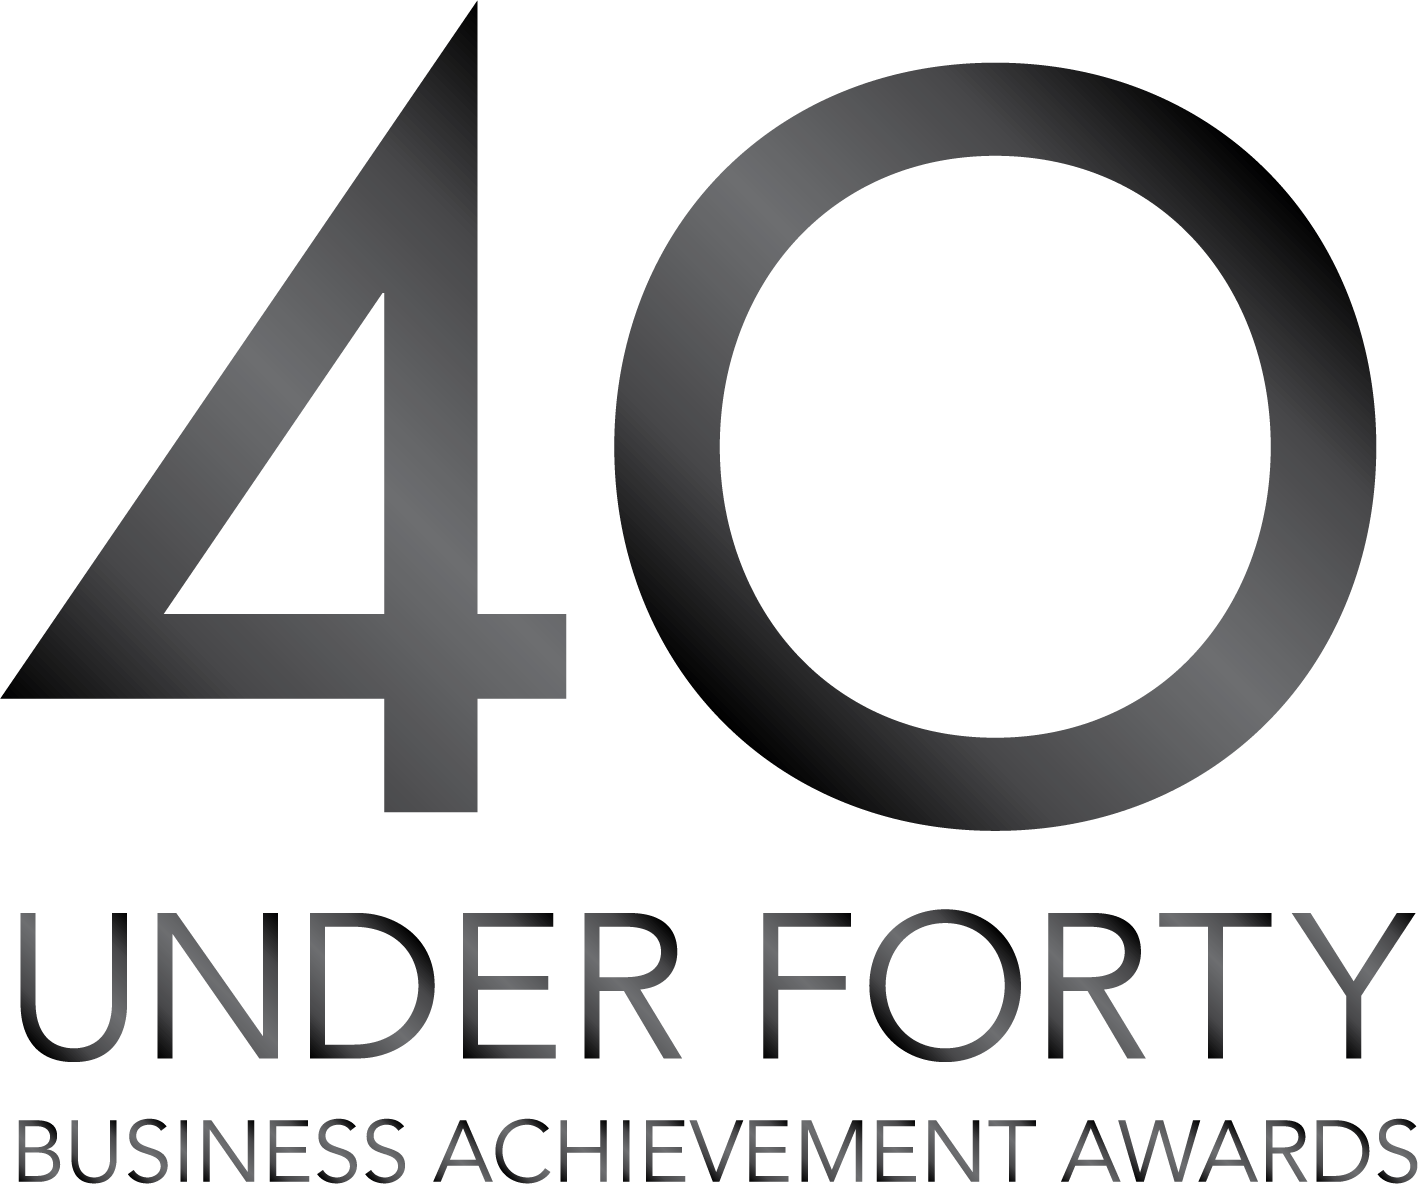 A silver 40 Under Forty Business Achievement Awards logo against a white background.